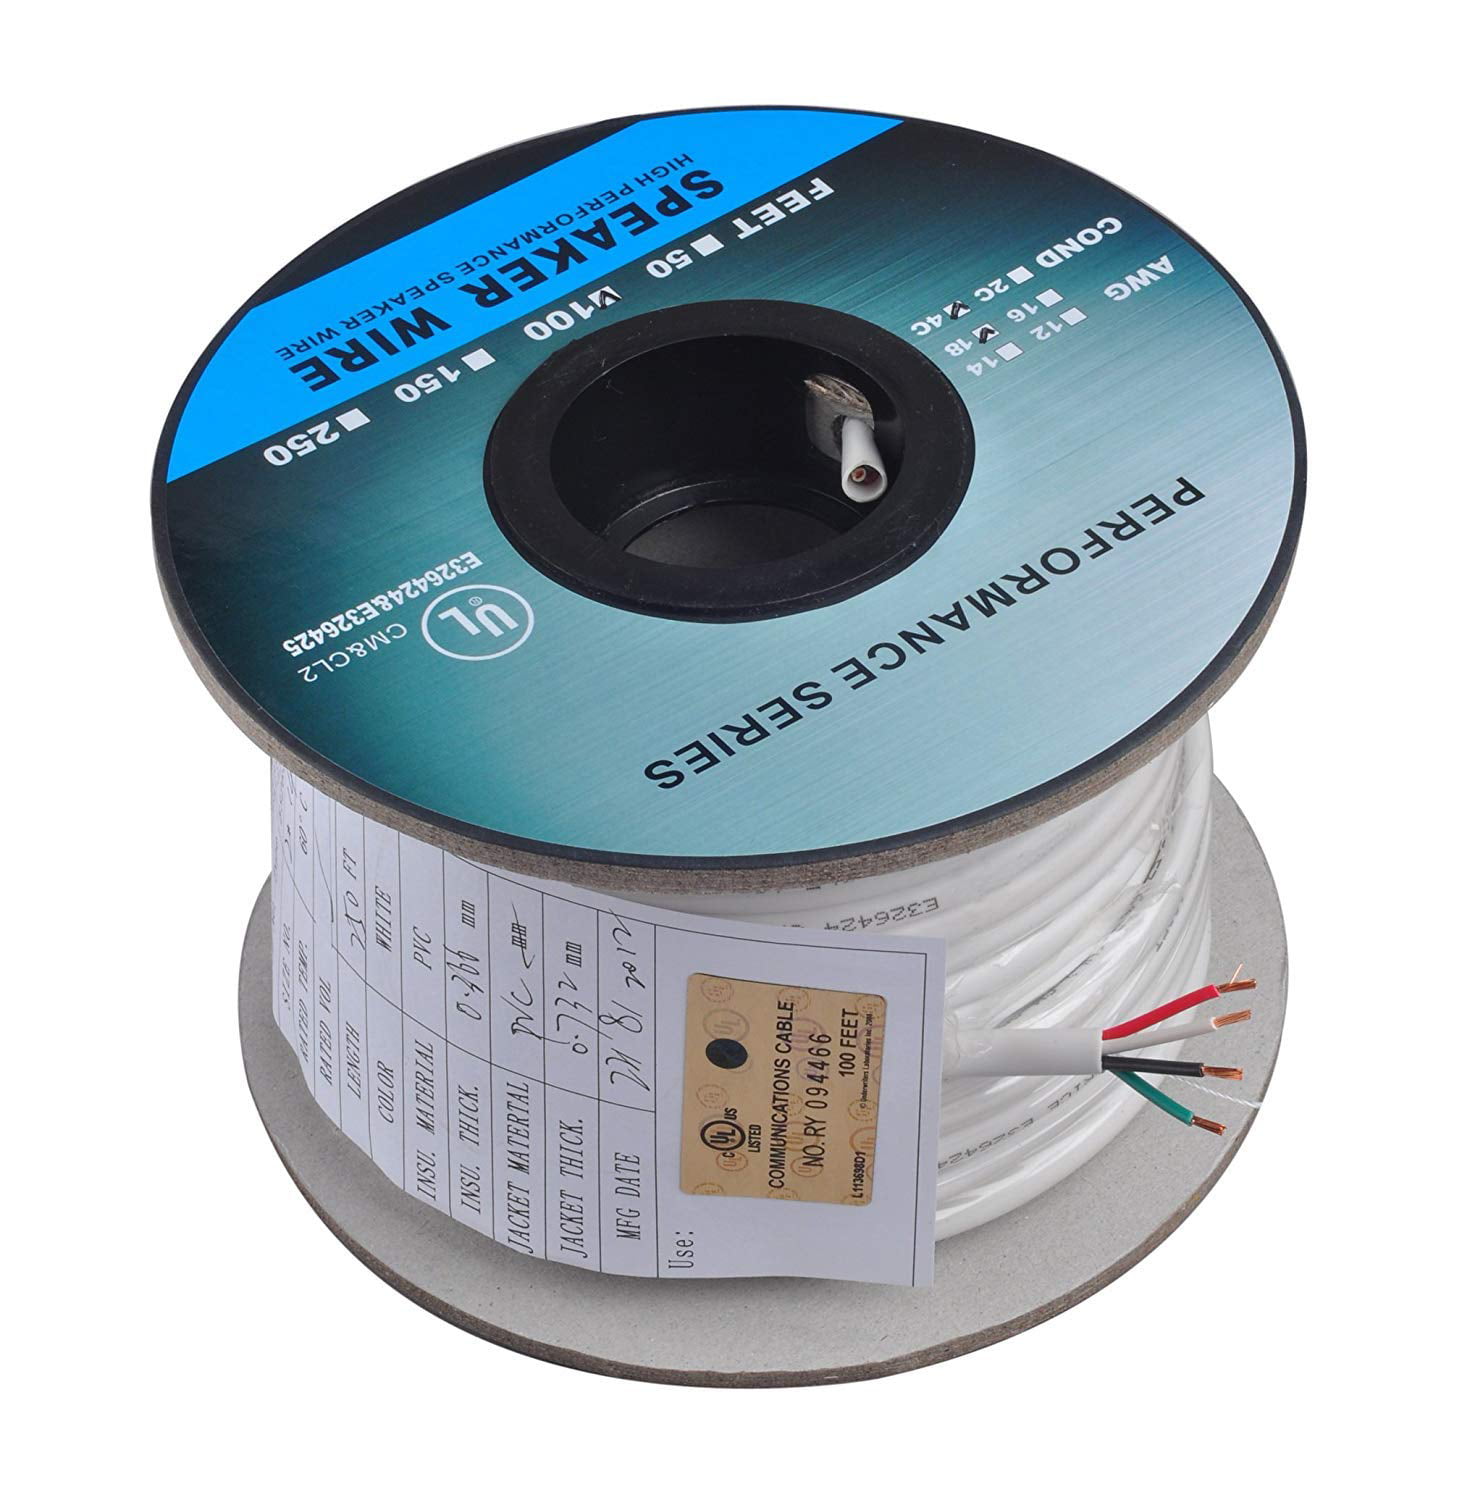 100 Feet / 30 Meter 100ft Great Use for Home Theater Speakers and Car Speakers 30m Pro Series 14 Gauge AWG 99.9% Oxygen Free Copper Speaker Wire Cable with Clear PVC Jacket & Polarity Stripe 